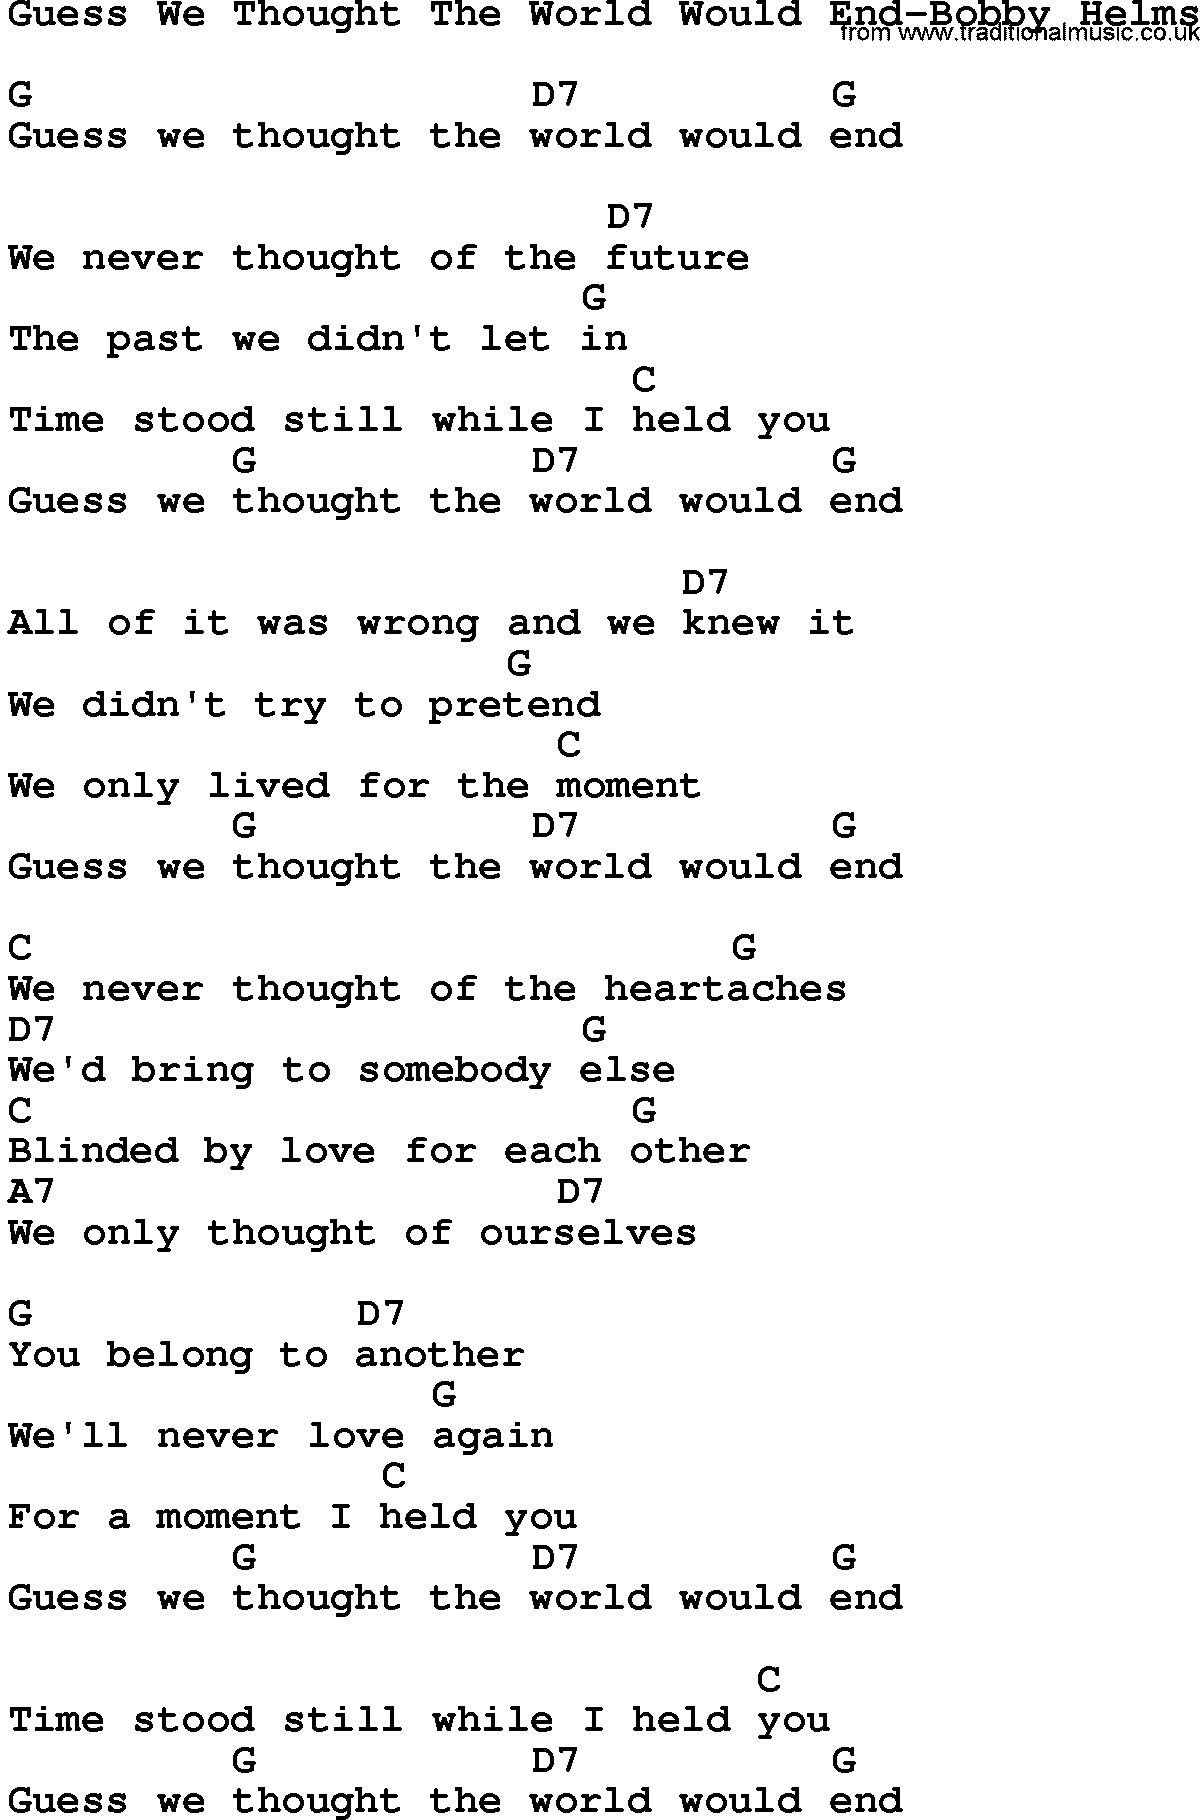 Country music song: Guess We Thought The World Would End-Bobby Helms lyrics and chords